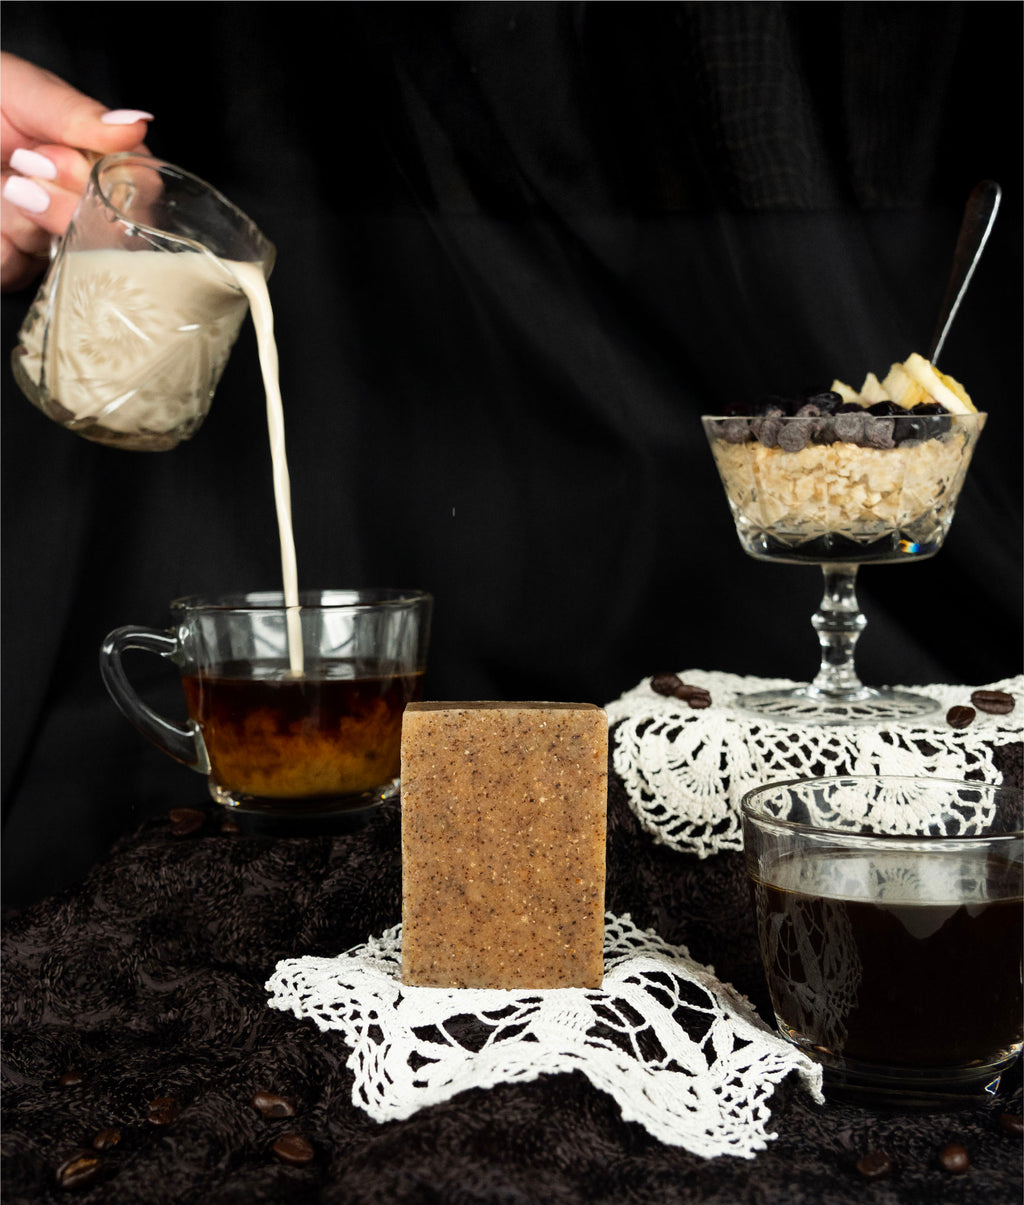 Oat milk latte soap sitting on a doily with milk being poured into coffee and a parfait behind it 